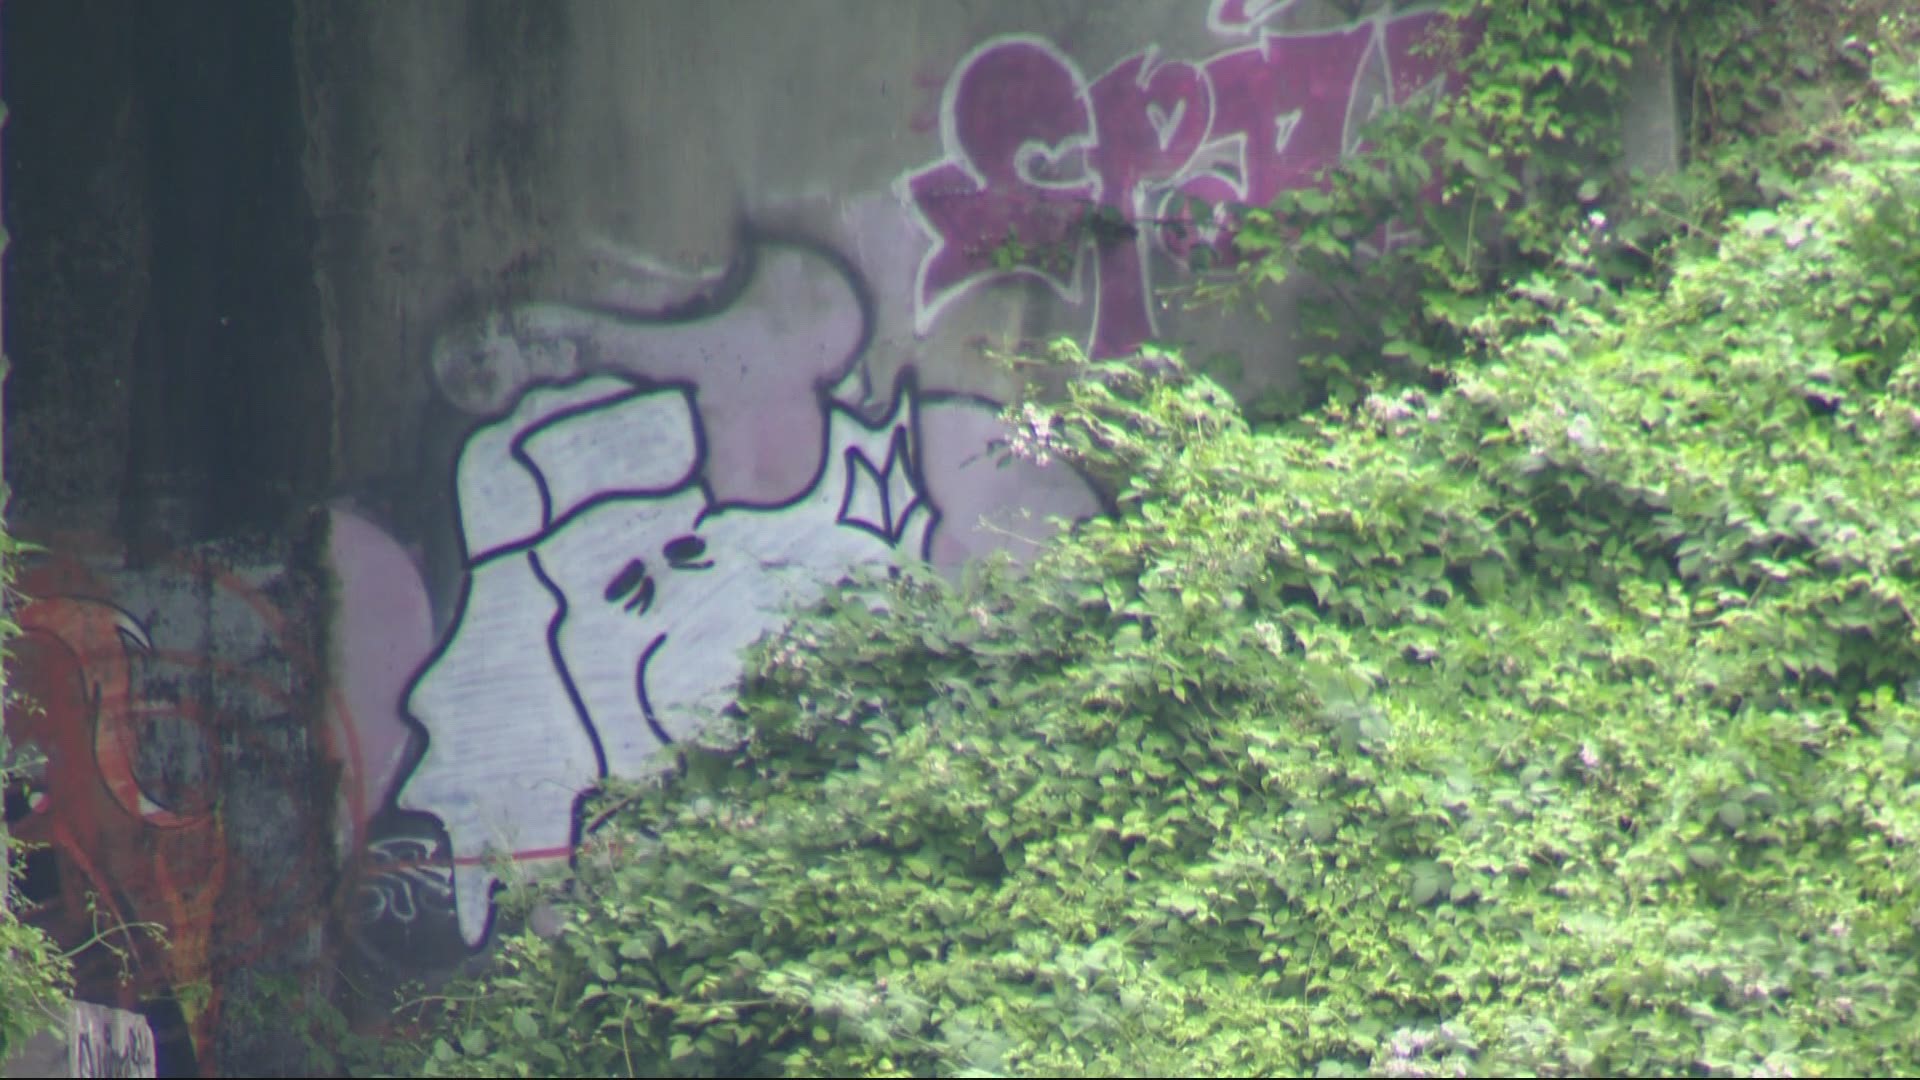 ODOT said the graffiti problem is getting worse along freeways. Crews have seen graffiti reappear within days of covering it.